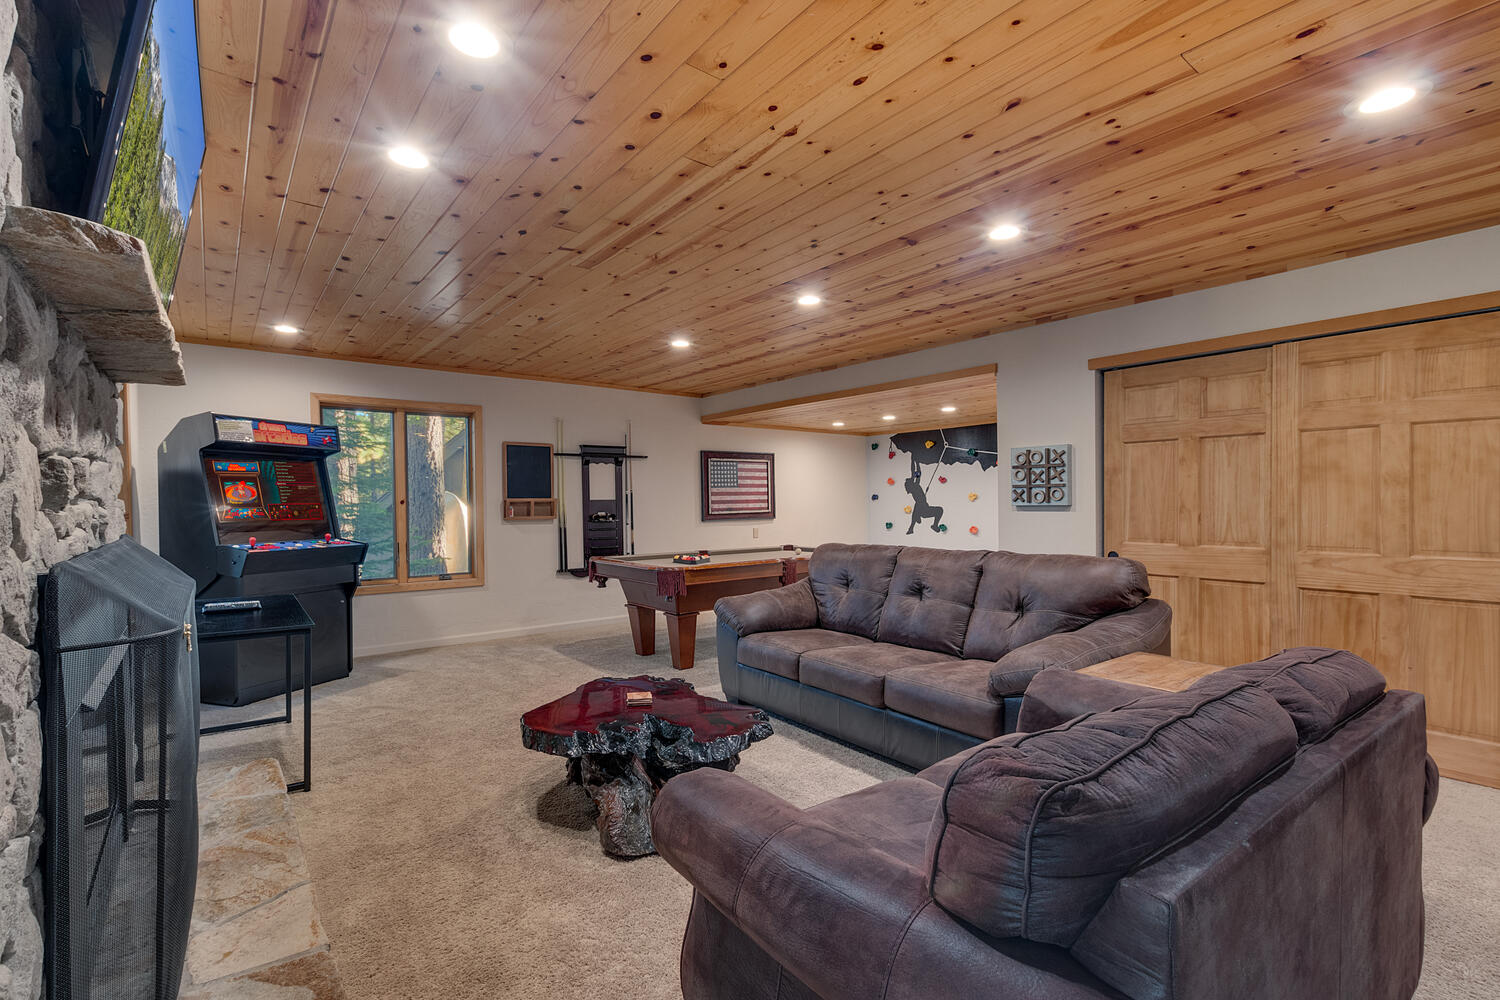 Recreation area with flat screen tv, fireplace, and upright arcade